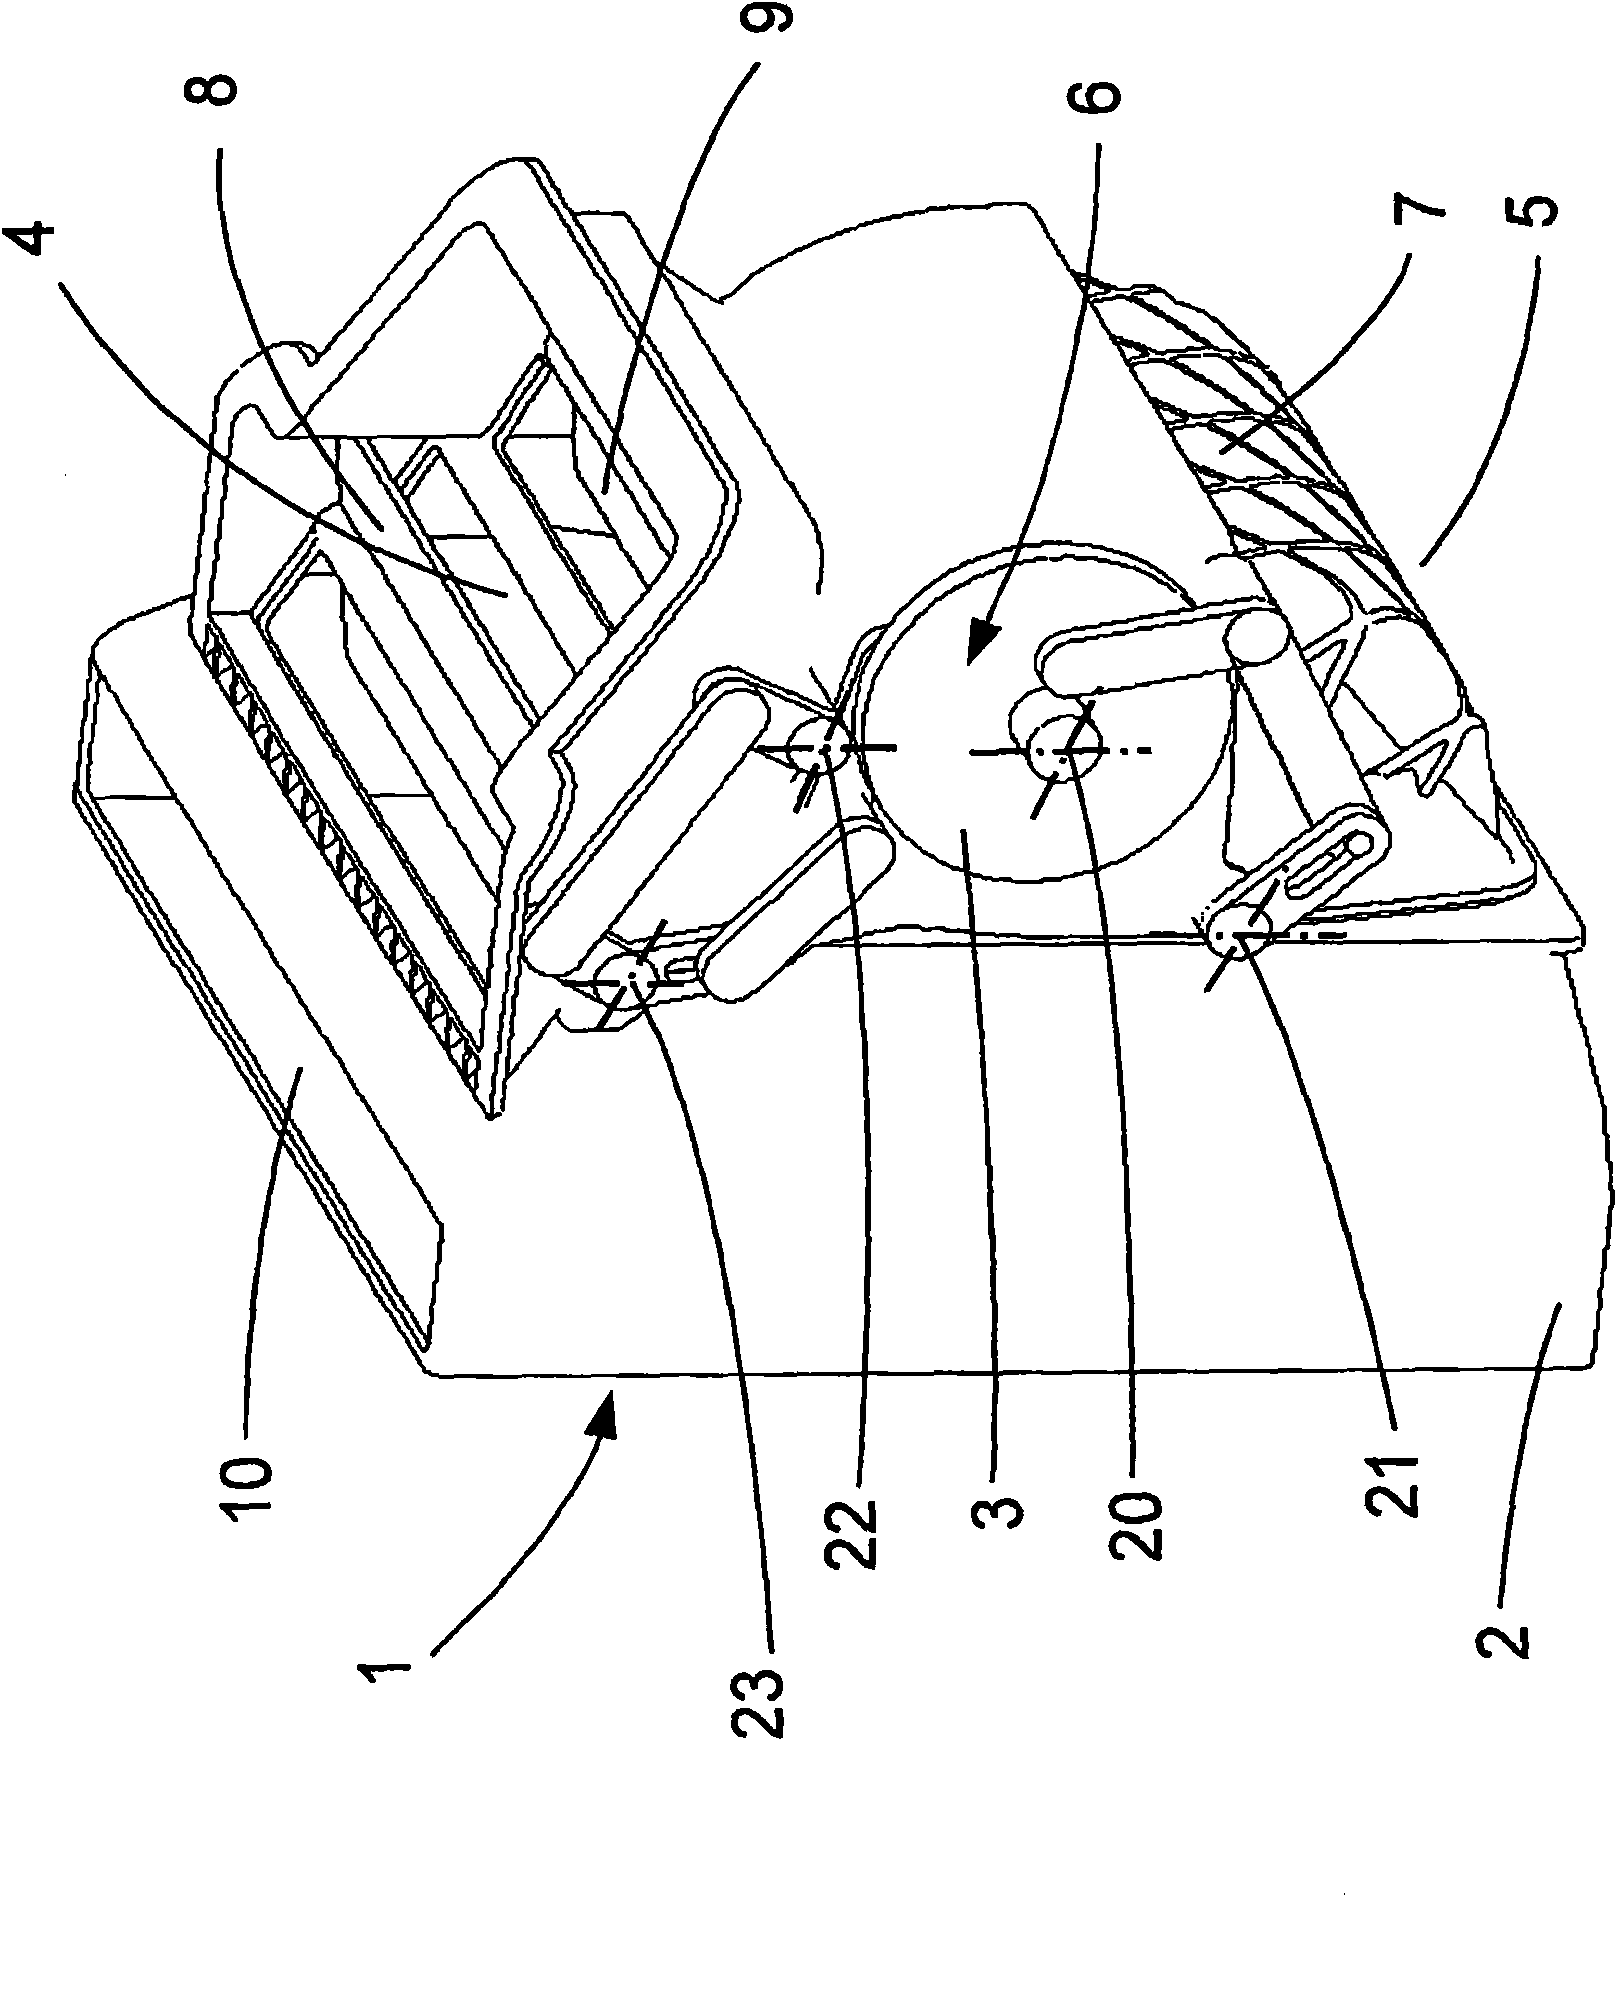 Device for controlling air flows